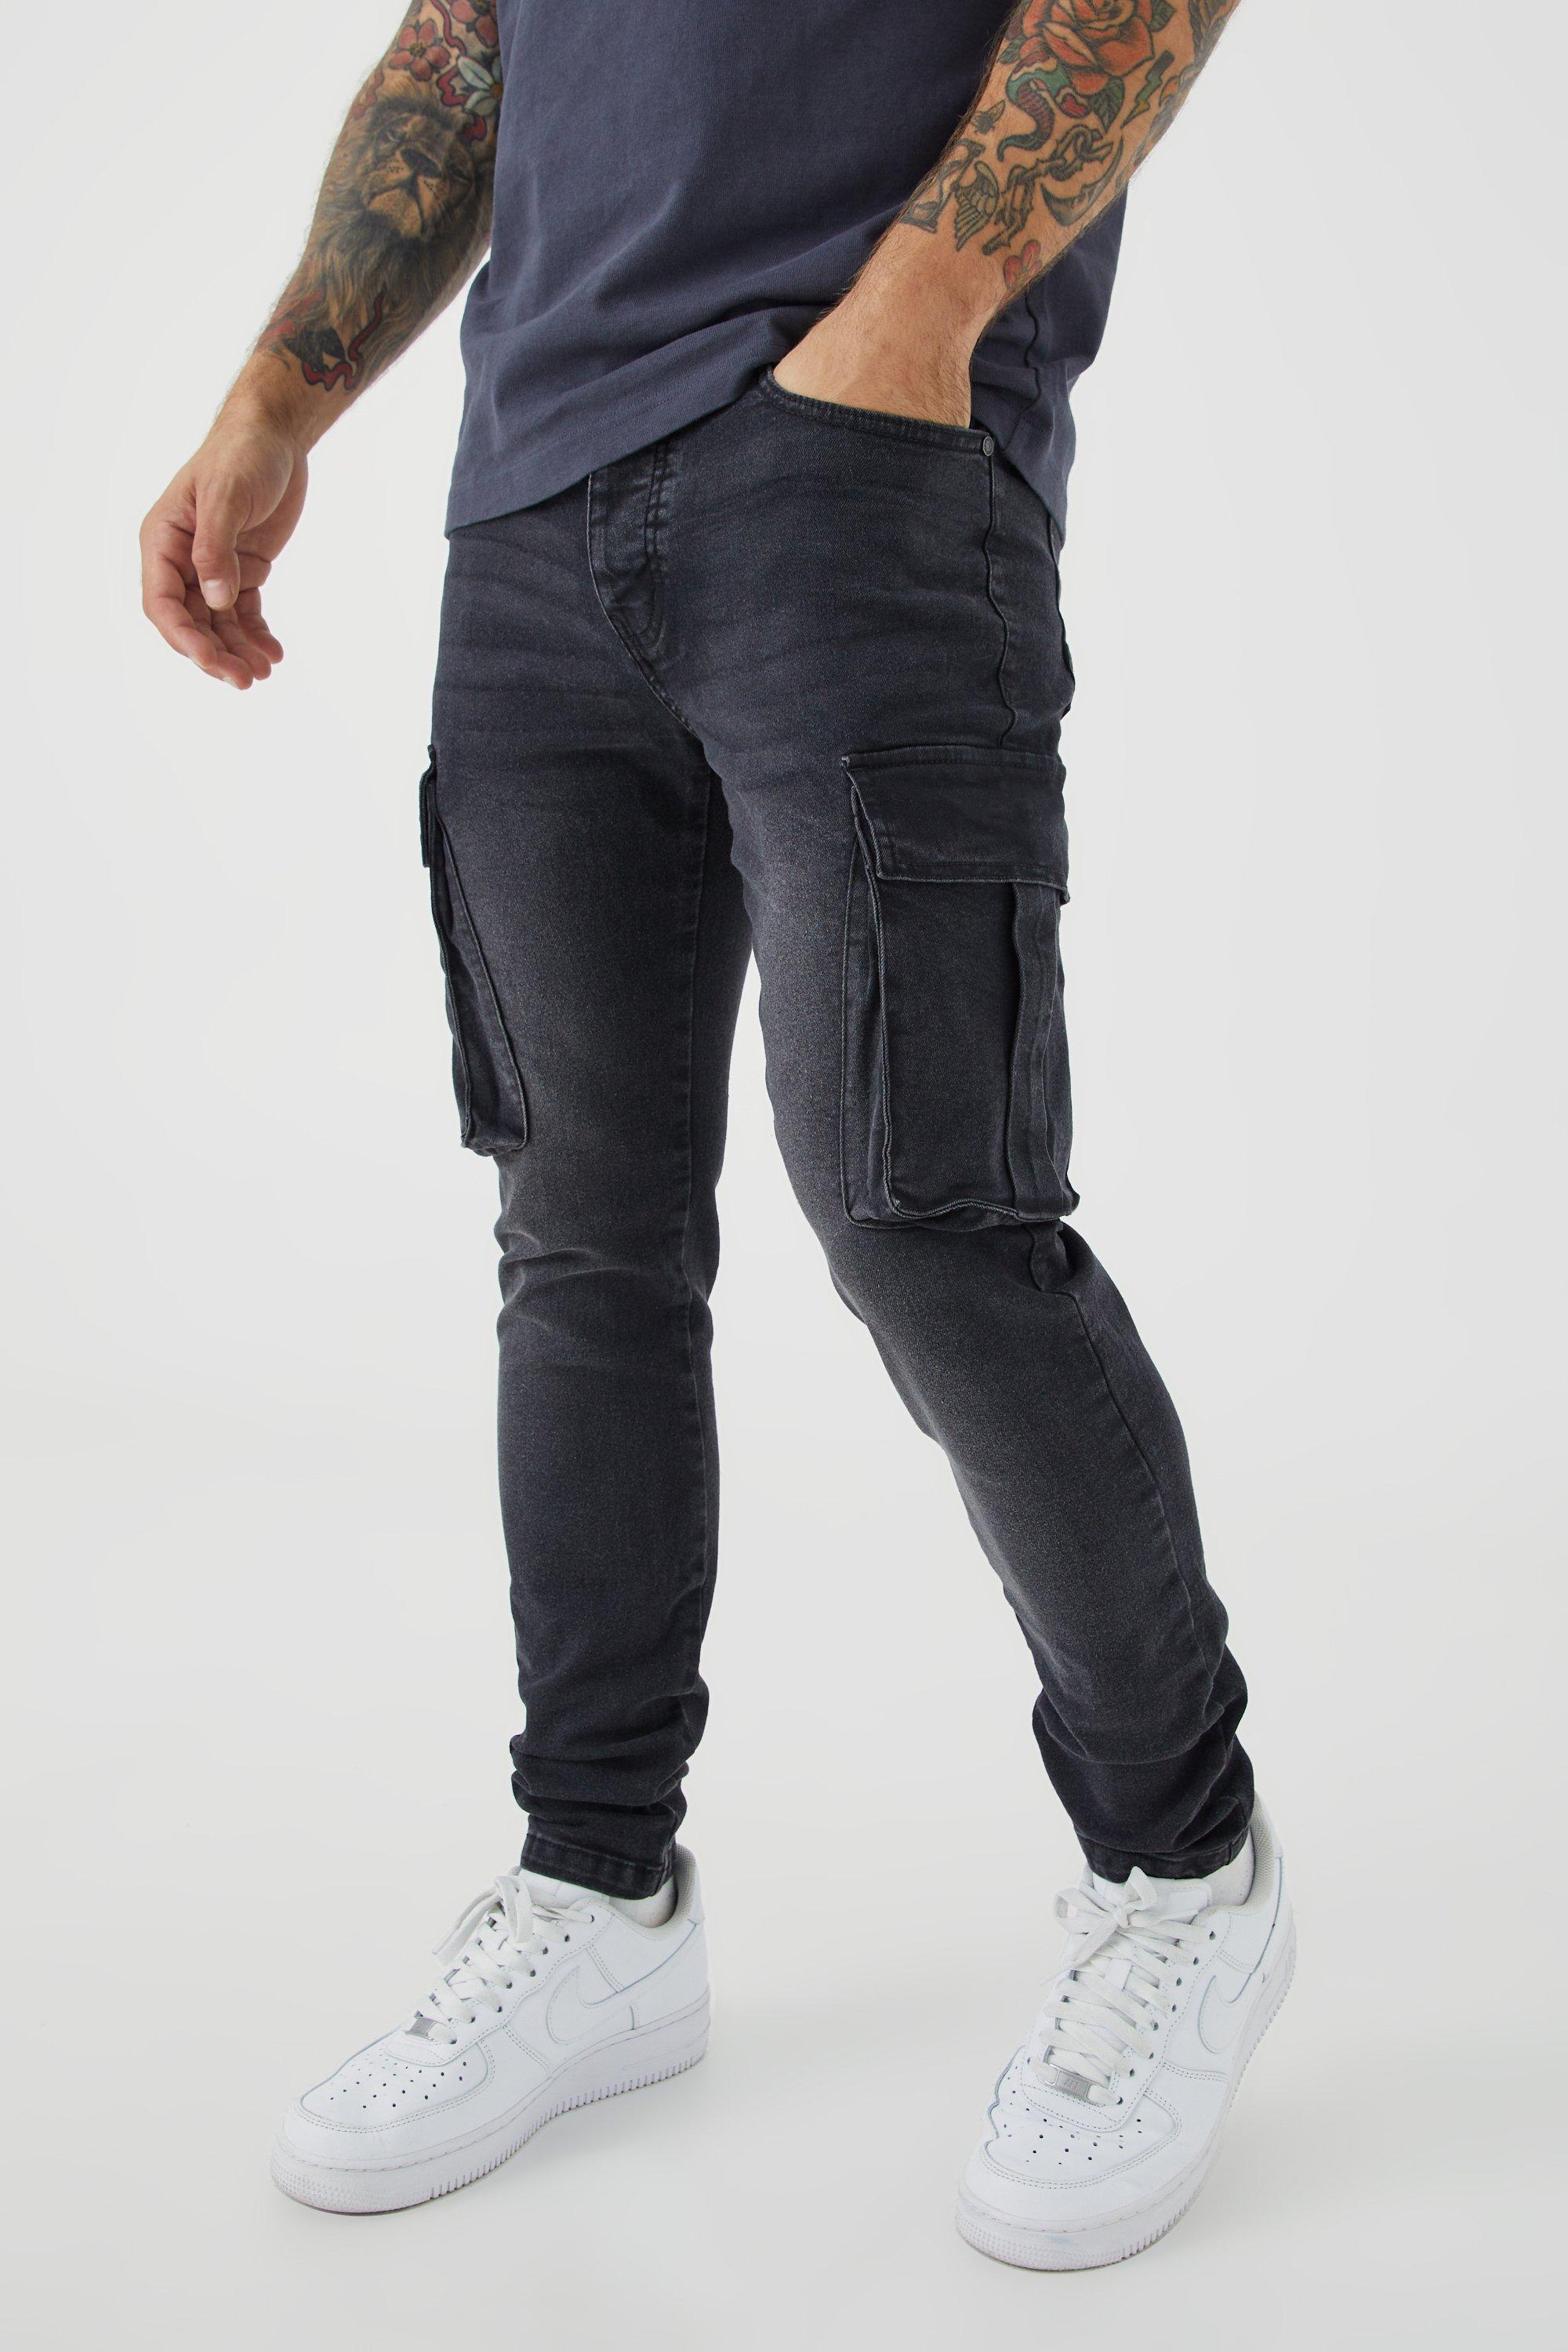 Mens Fashion Jeans, Mens Printed Jeans